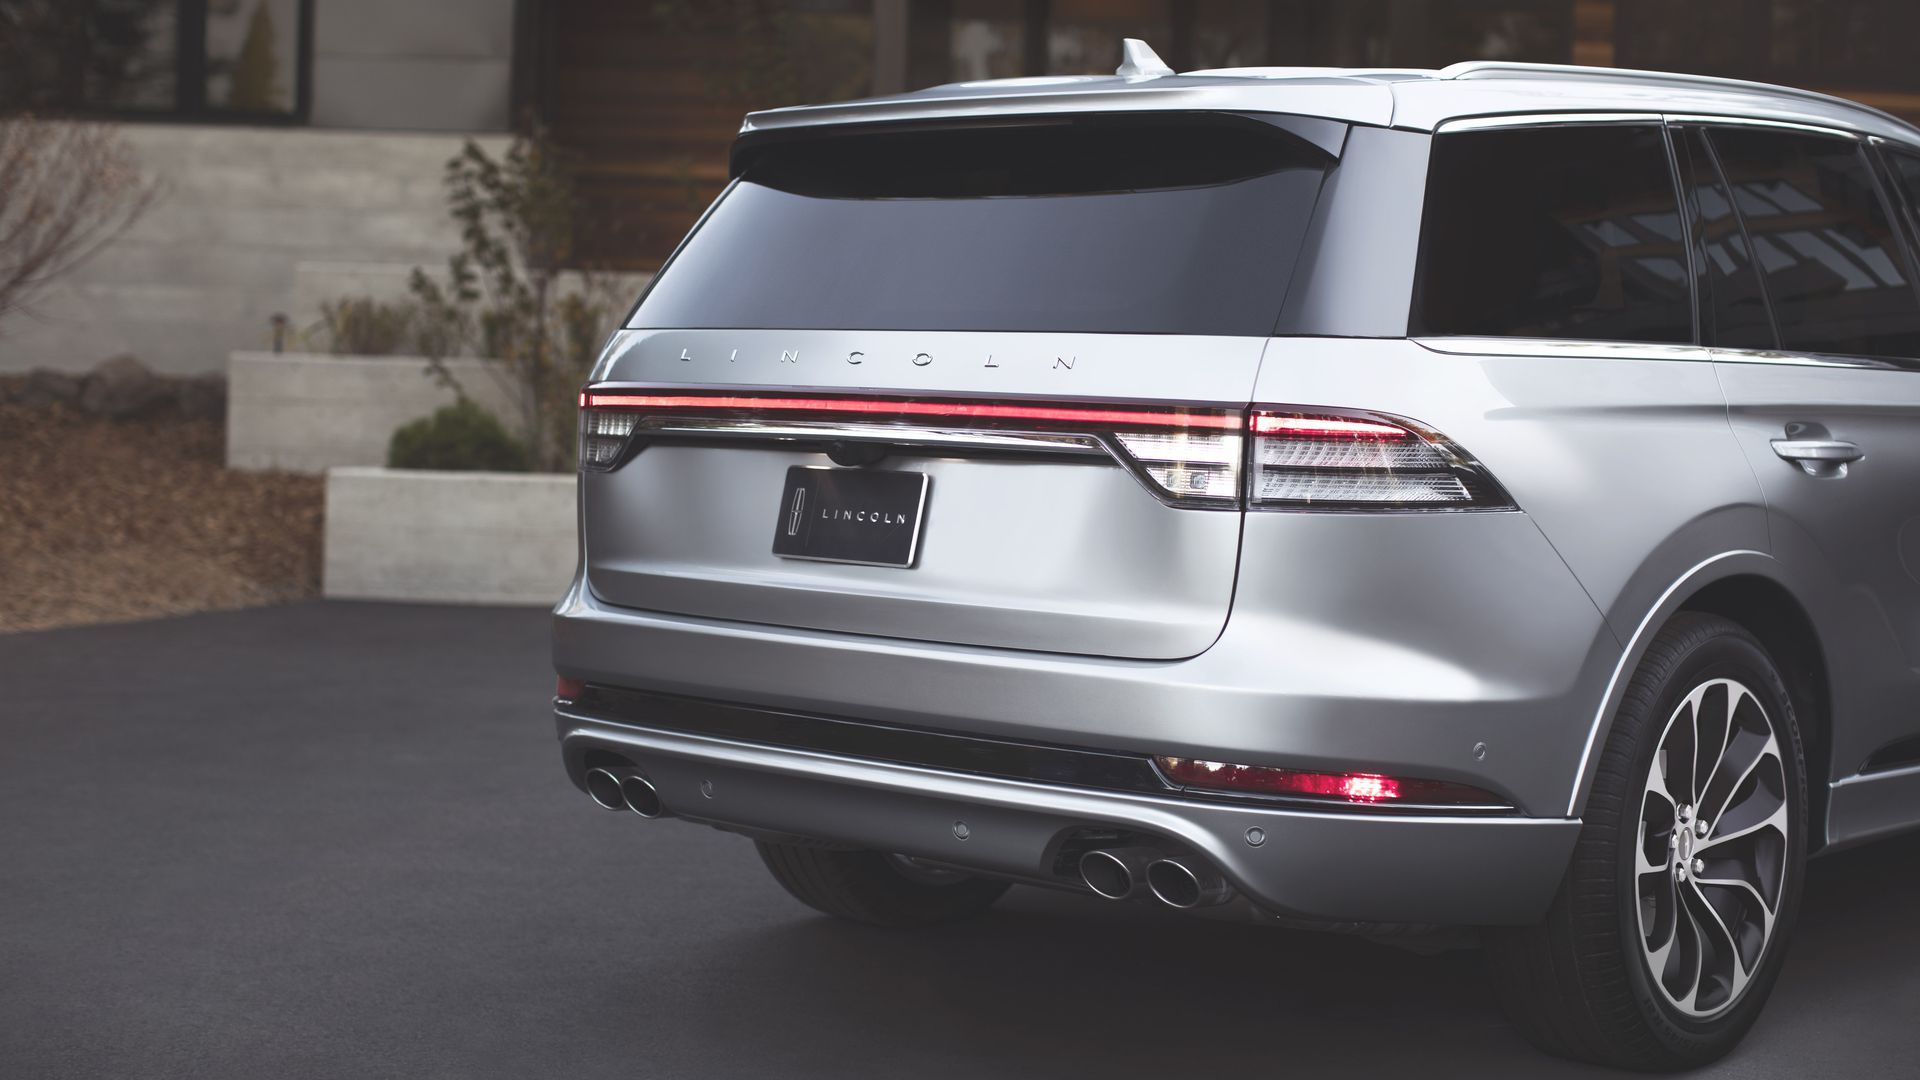 The back of the 2020 Lincoln Aviator